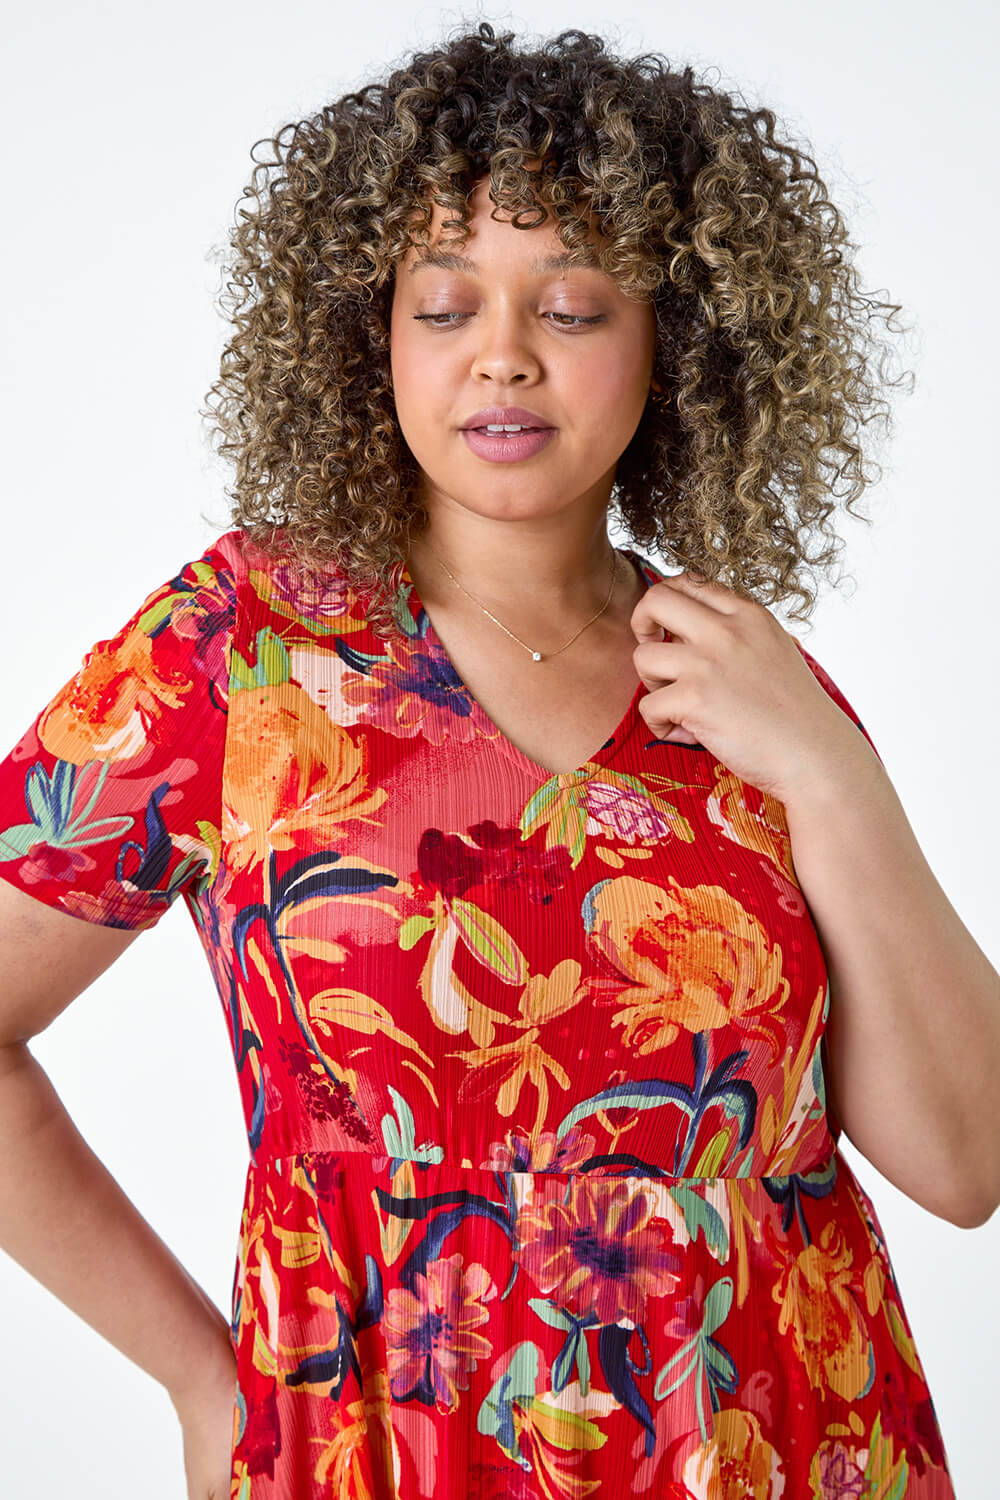 Red Curve Floral Print Stretch Jersey Dress, Image 4 of 5